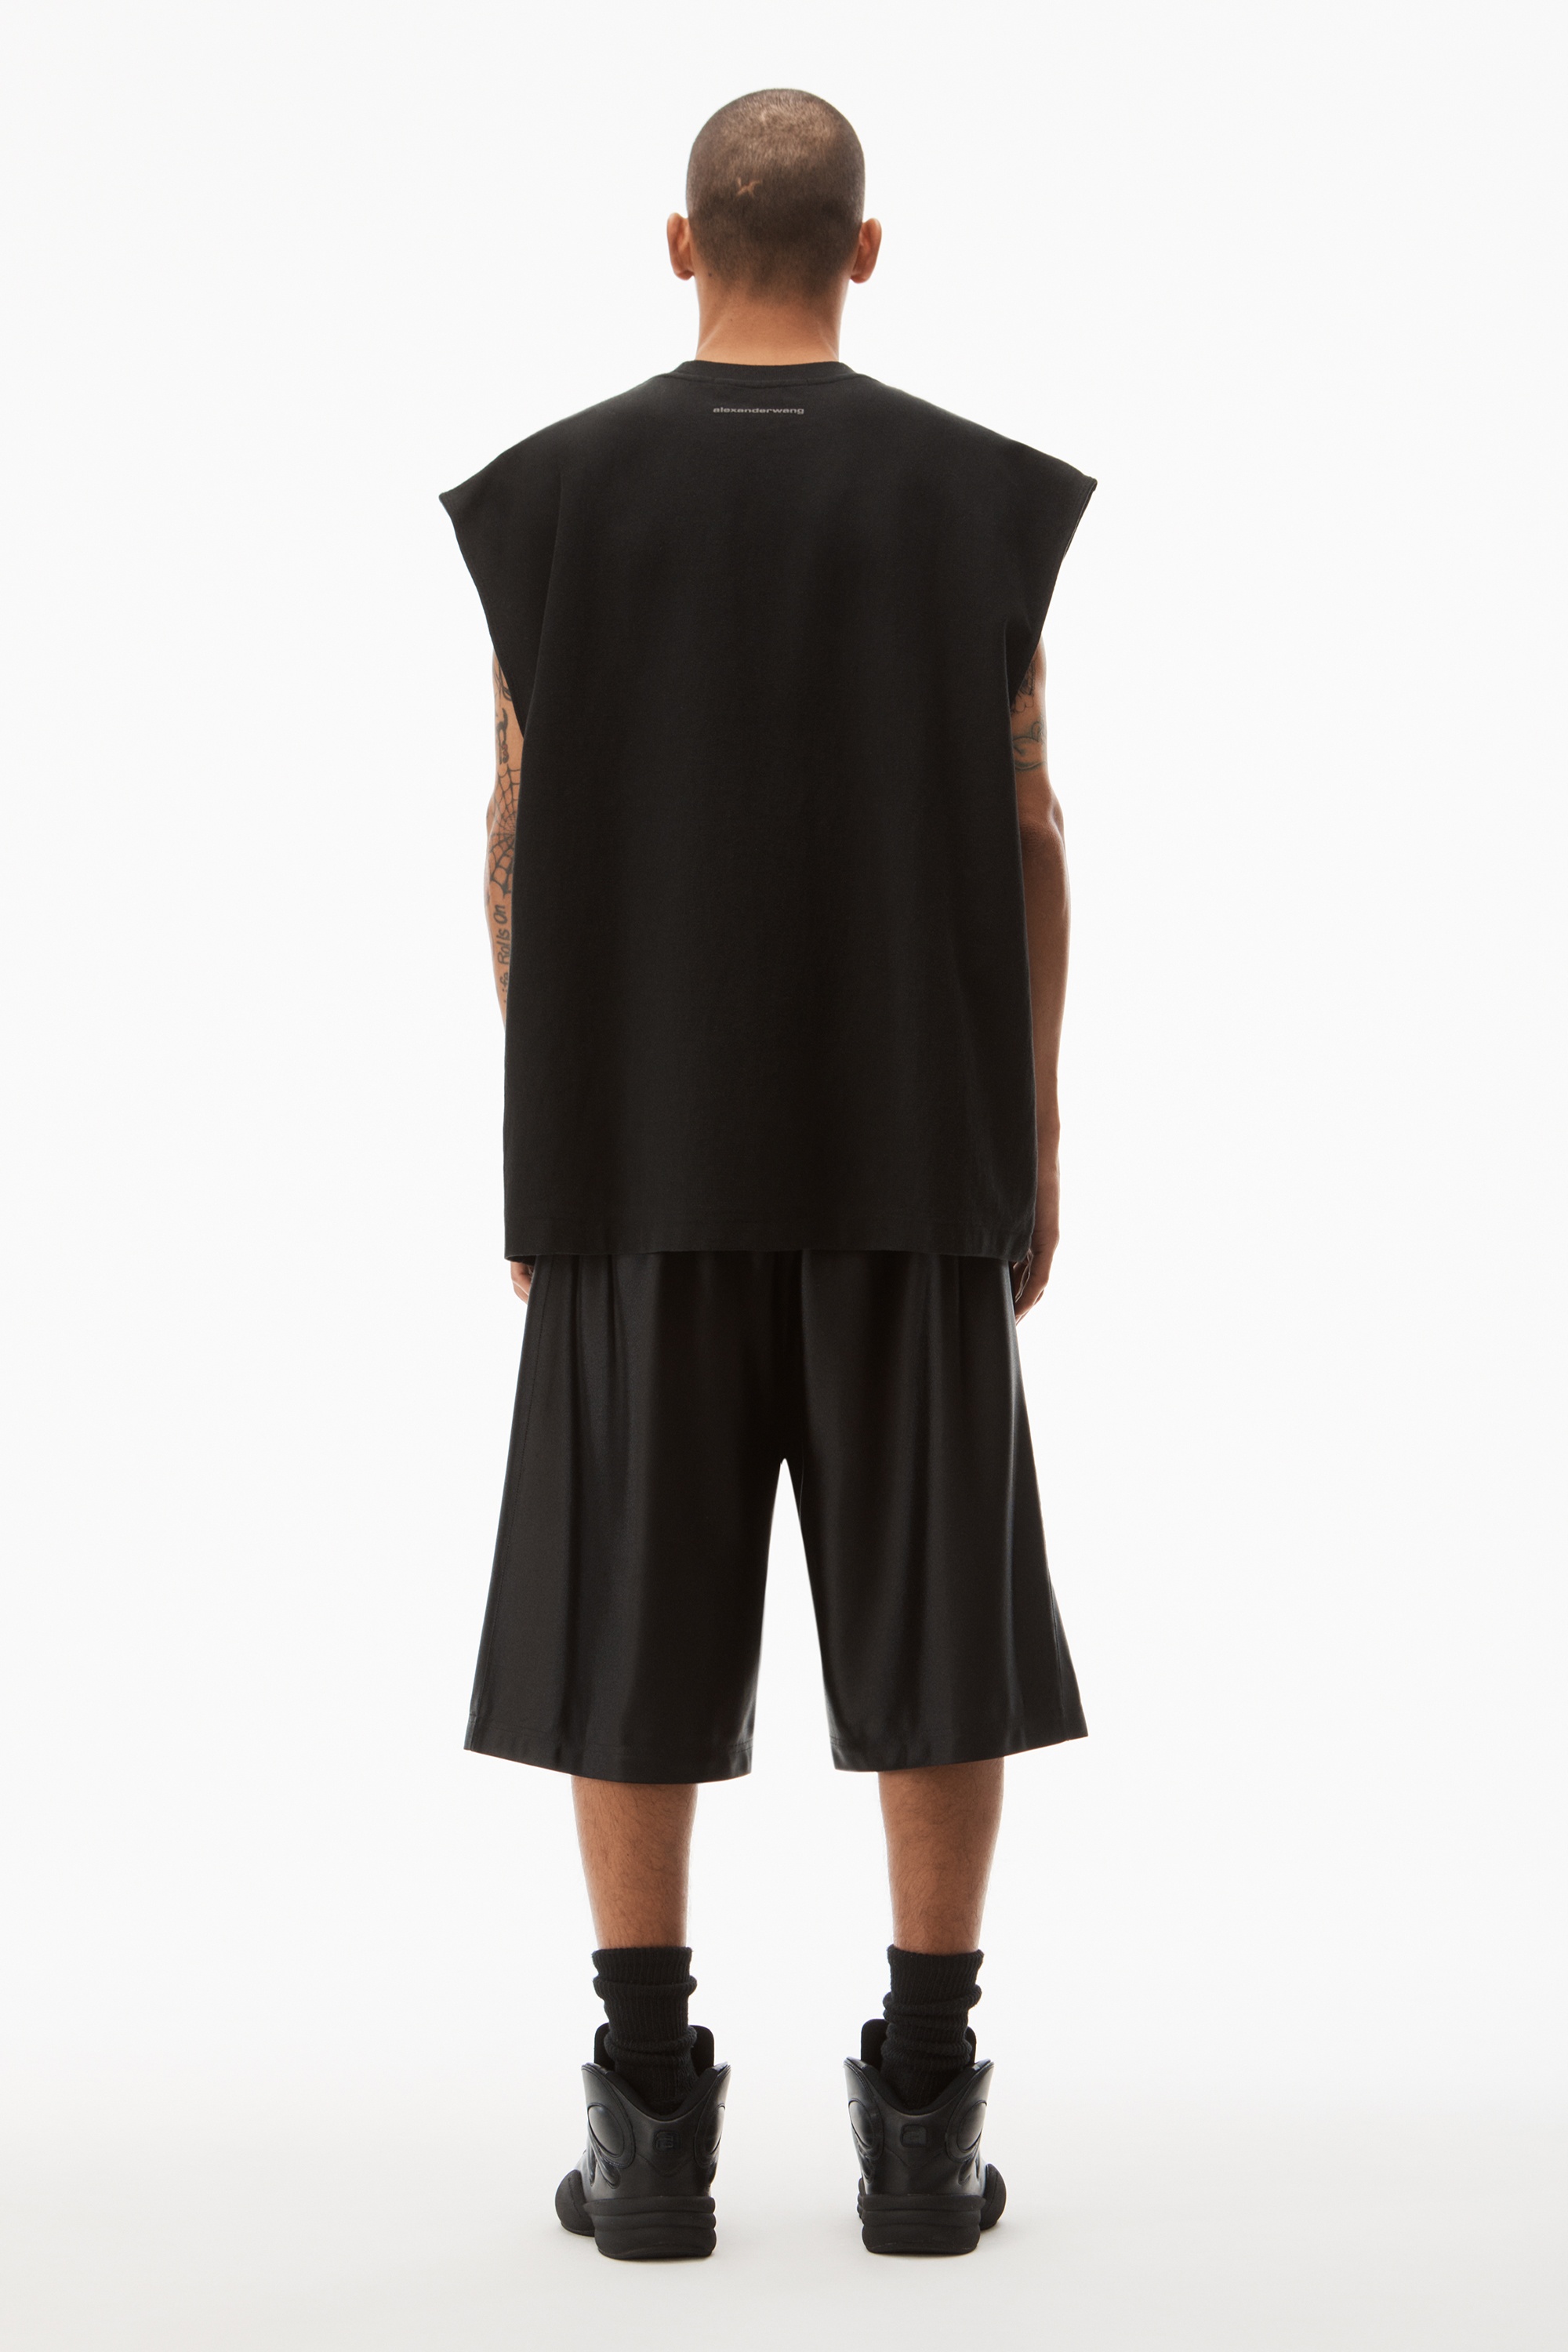 Alexander Wang BEEFY GRAPHIC MUSCLE TANK IN JAPANESE JERSEY 